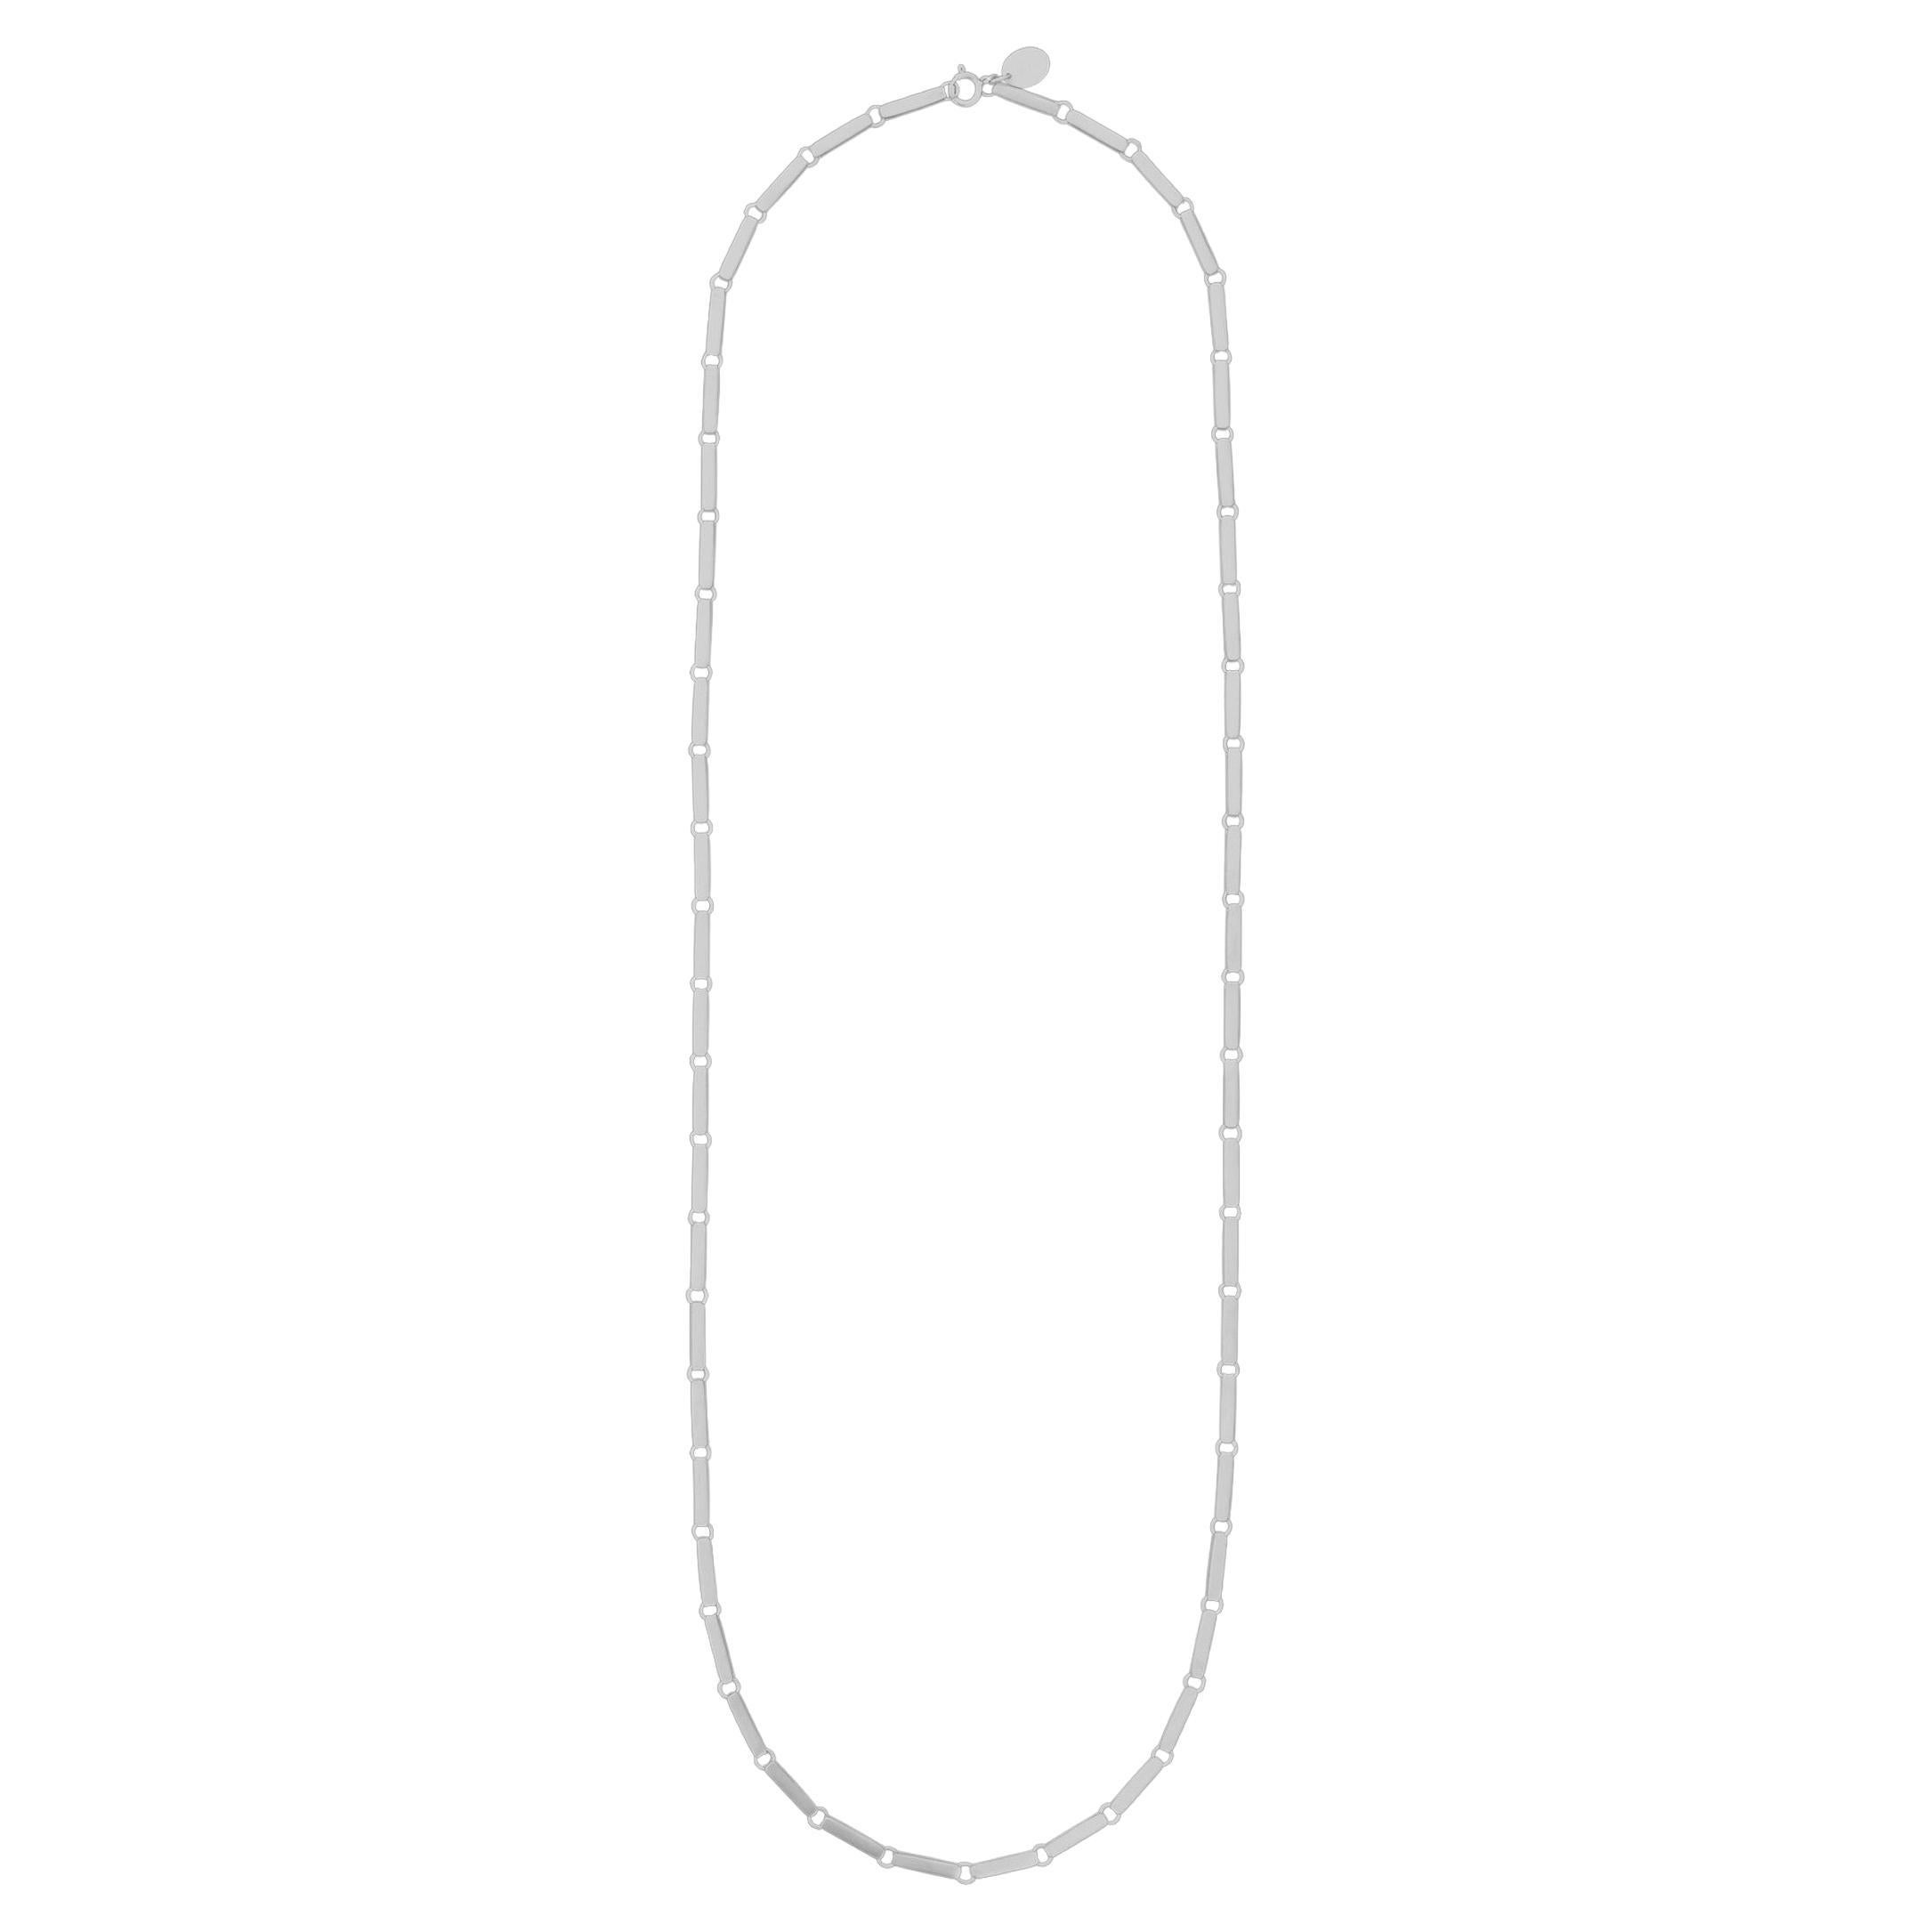 Tiana Marie Combes White Gold Solid Rectangular Bar Link Extended Chain Necklace